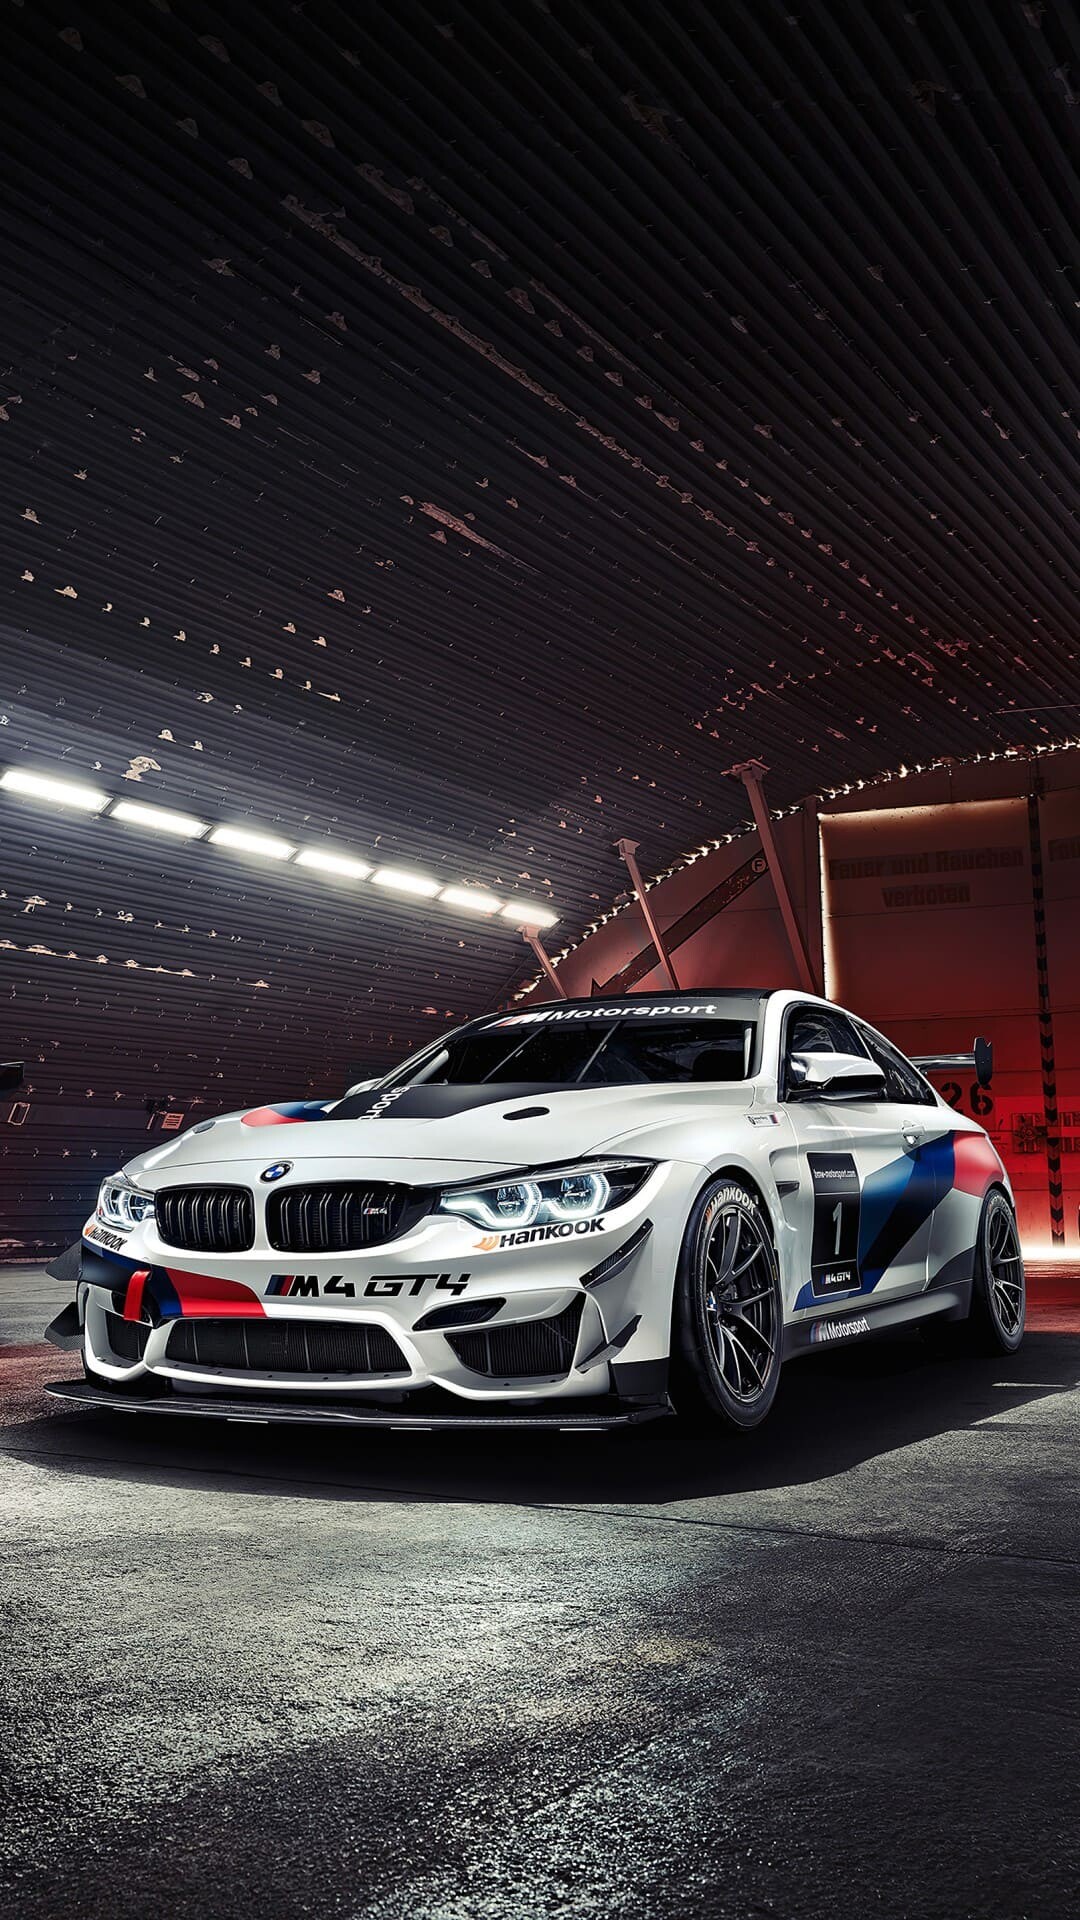 BMW: M series, High-performance coupes, convertibles, sedans and SUVs. 1080x1920 Full HD Background.